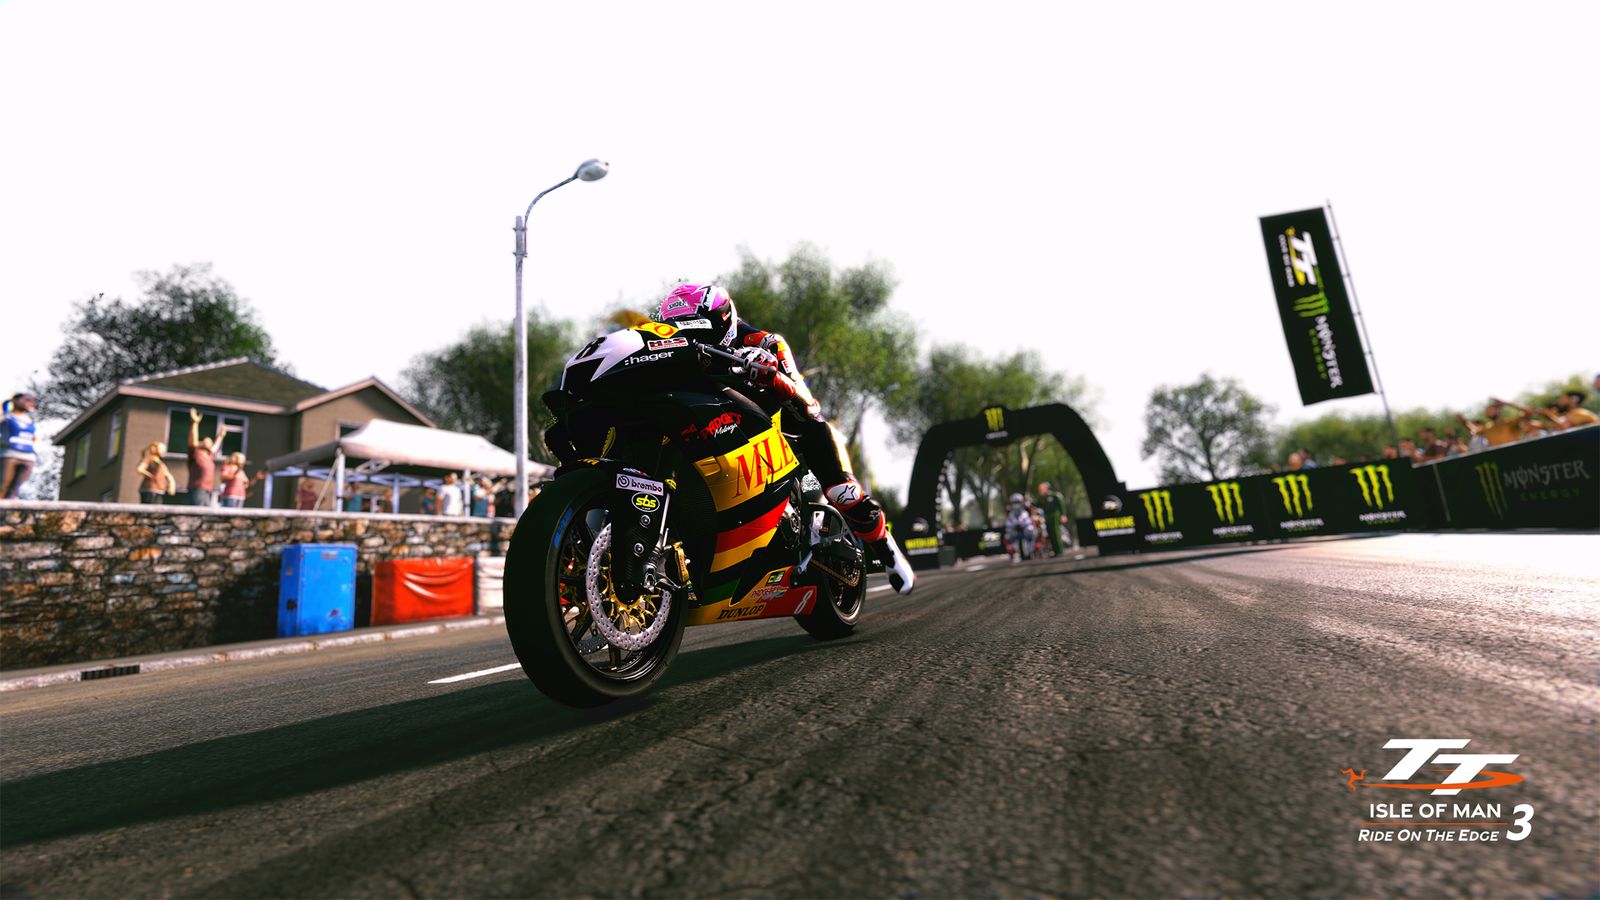 TT Isle of Man - Ride on the Edge 3 review